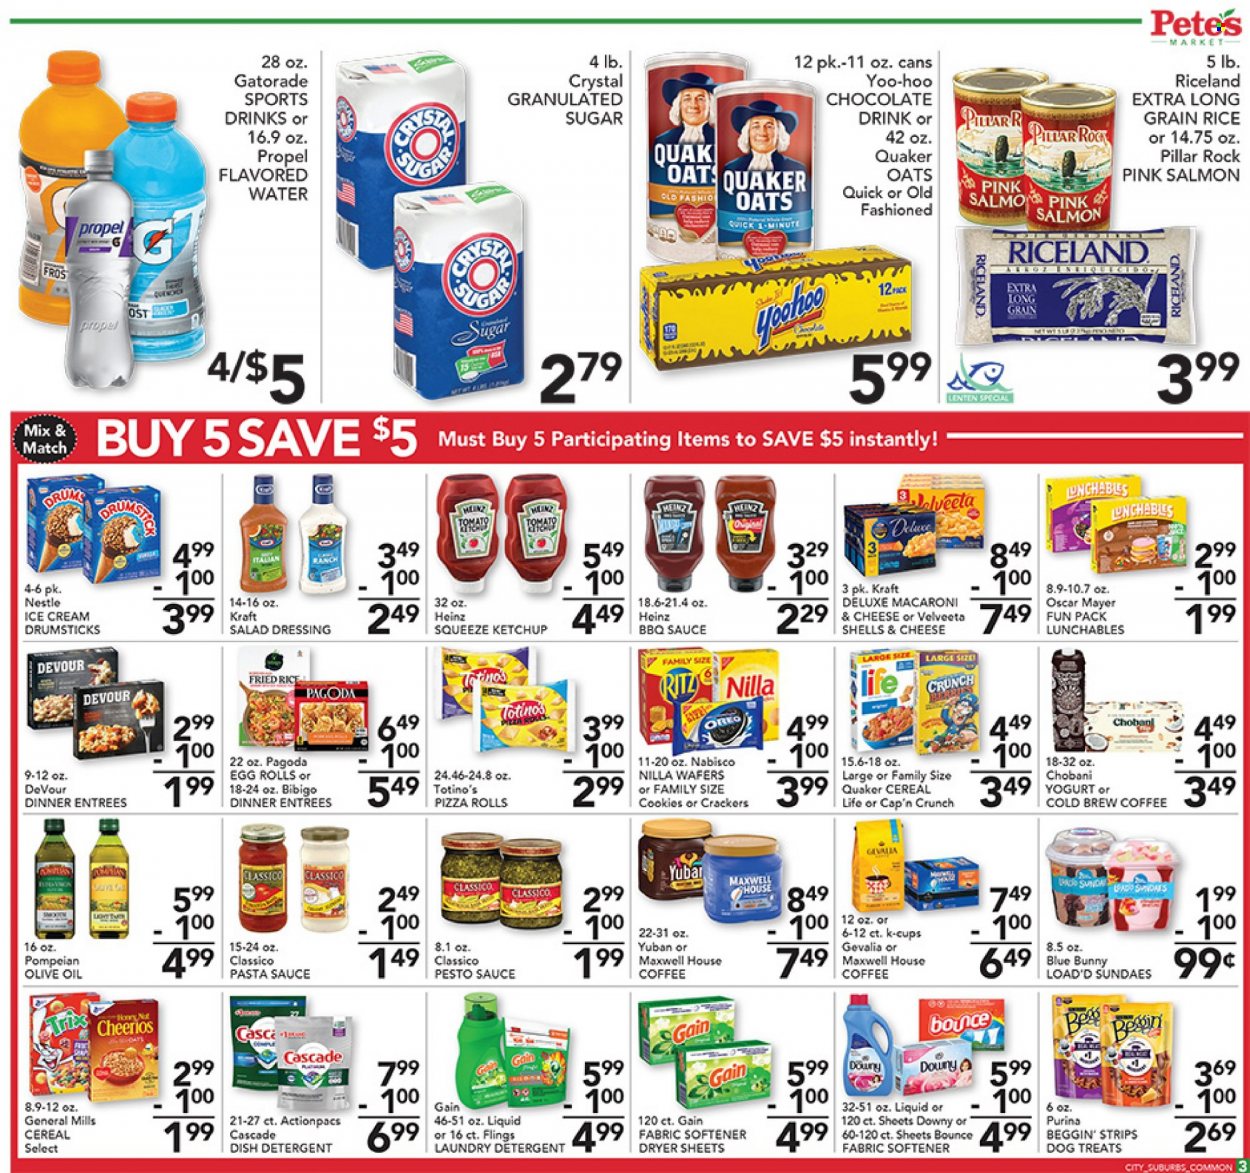 thumbnail - Pete's Fresh Market Flyer - 03/22/2023 - 03/28/2023 - Sales products - pizza rolls, salmon, macaroni & cheese, pizza, pasta sauce, sauce, egg rolls, Quaker, Lunchables, Kraft®, Oscar Mayer, Oreo, yoghurt, Chobani, ice cream, Blue Bunny, strips, Devour, cookies, Nestlé, wafers, crackers, RITZ, granulated sugar, sugar, oats, Heinz, cereals, Cheerios, Cap'n Crunch, long grain rice, BBQ sauce, salad dressing, ketchup, pesto, dressing, Classico, olive oil, oil, Gatorade, flavored water, water, chocolate drink, Maxwell House, coffee, coffee capsules, K-Cups, Gevalia. Page 3.